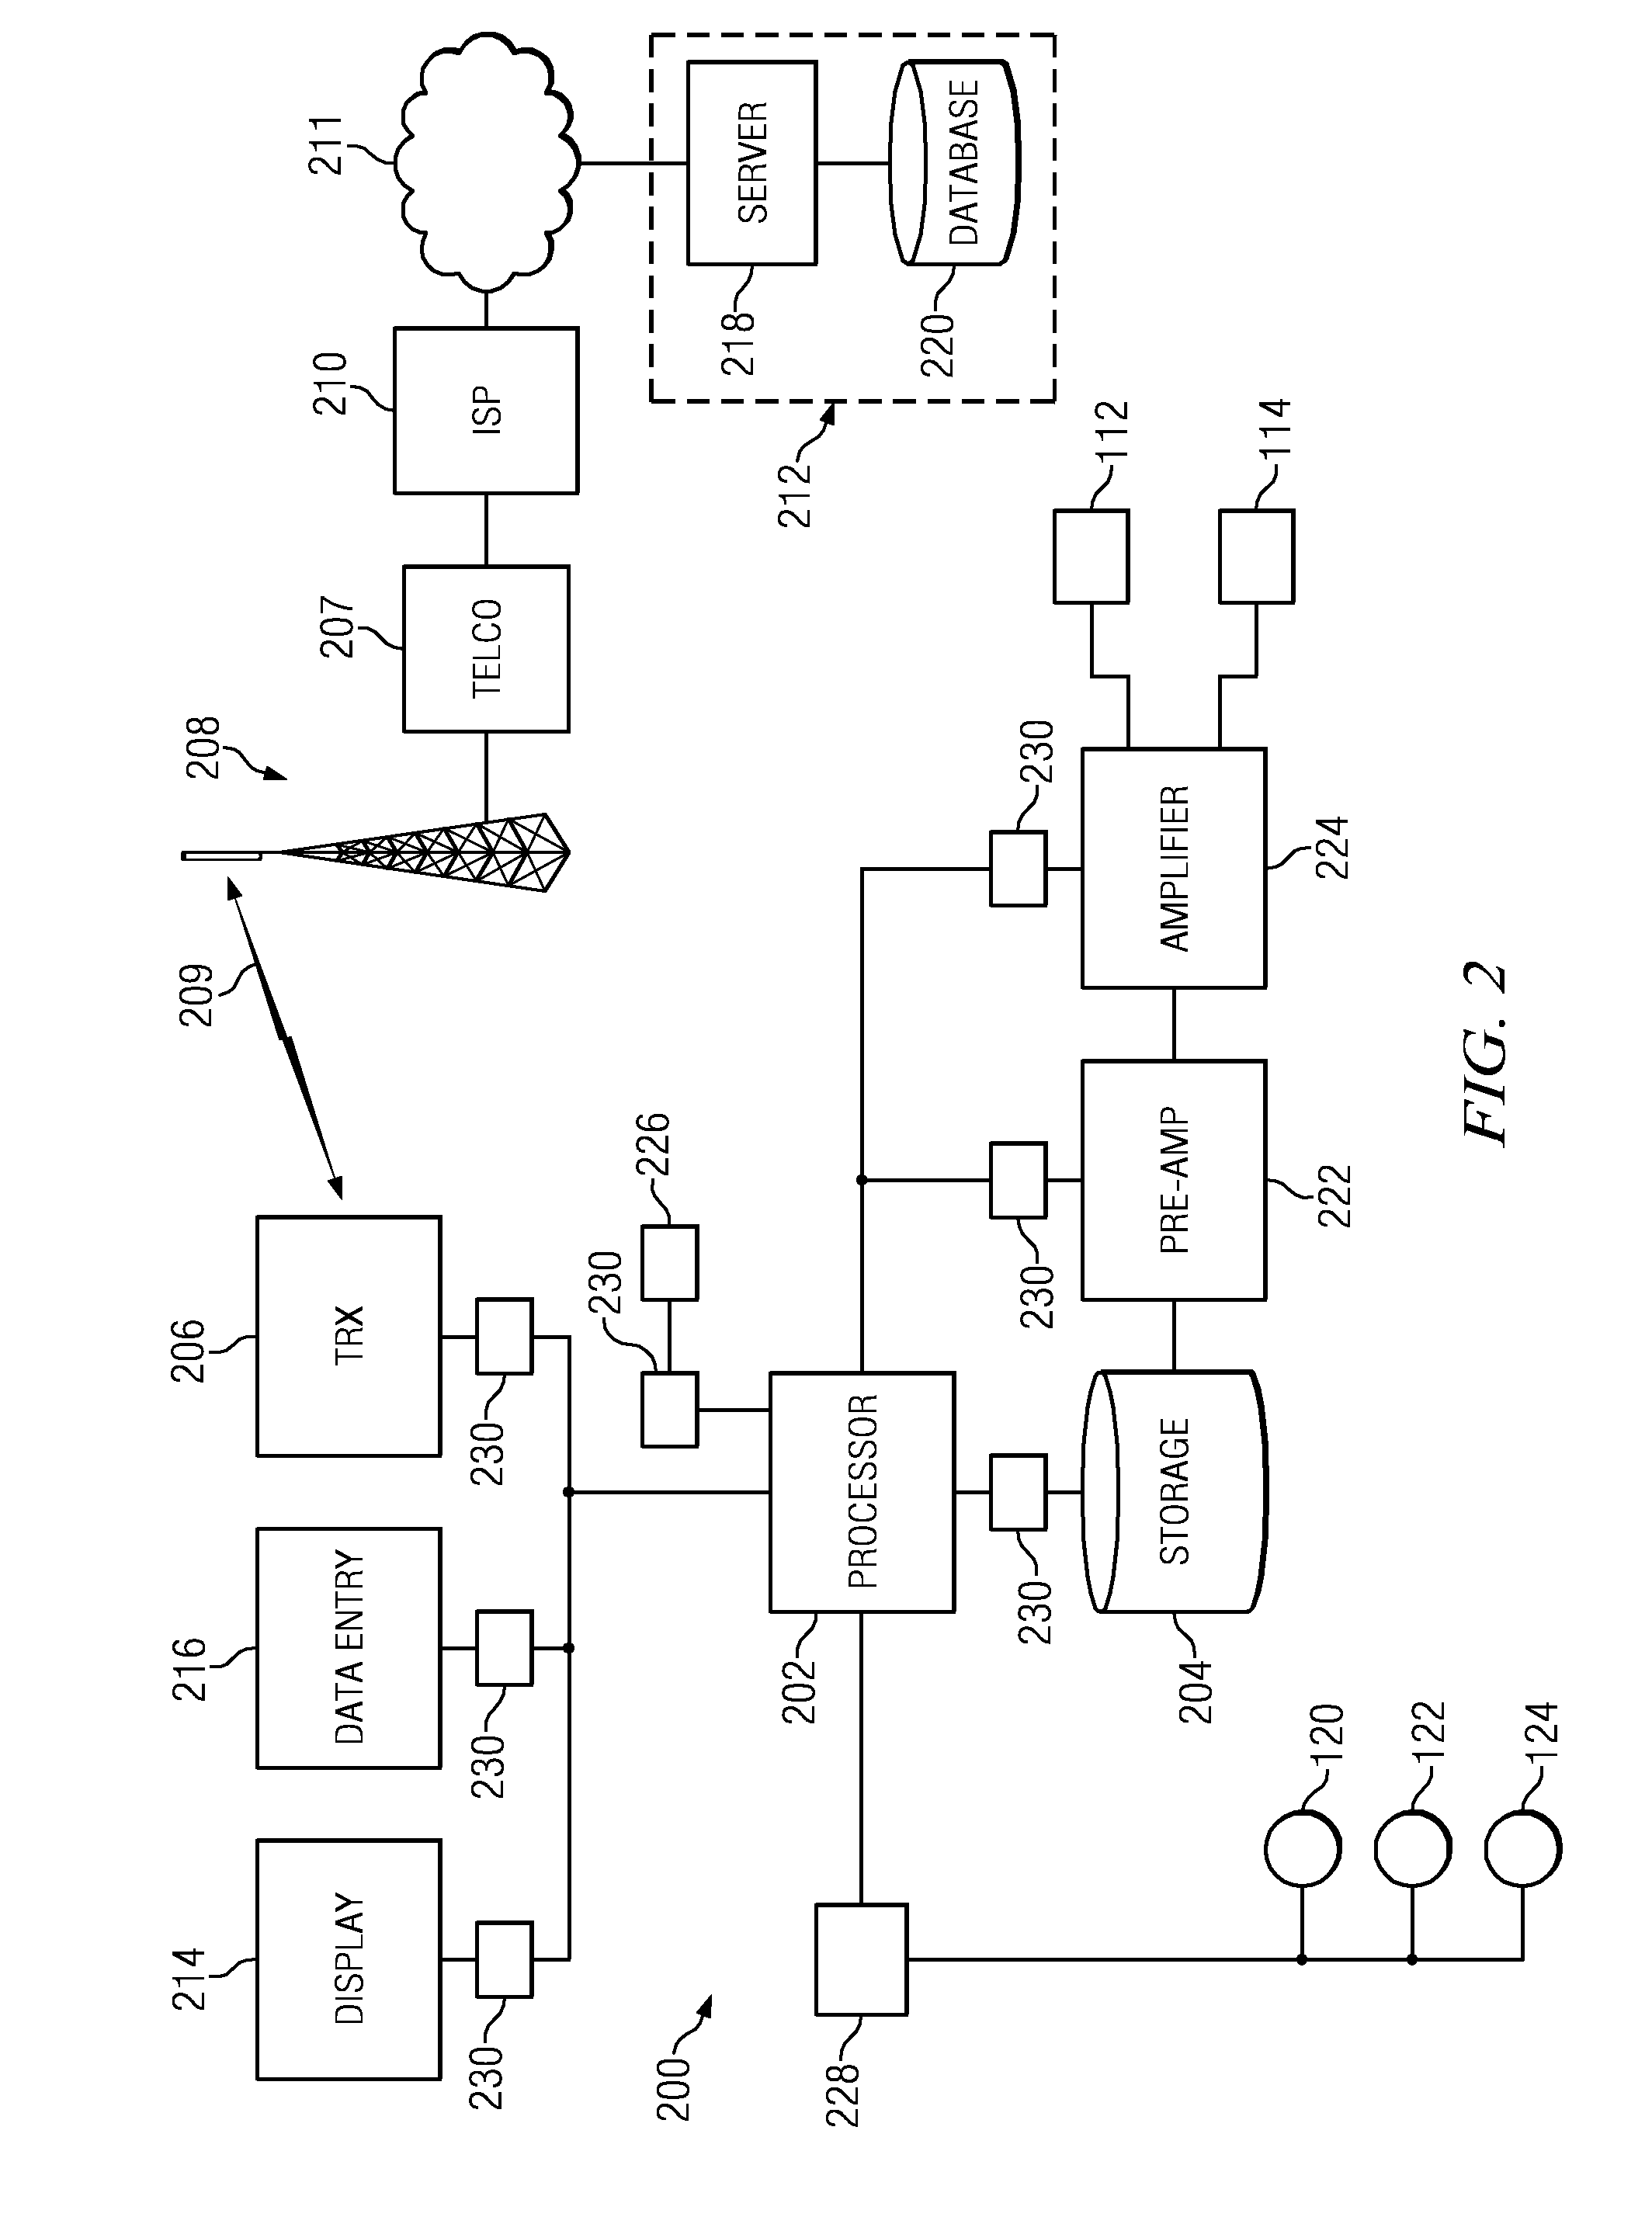 Vehicle audio system for producing synthetic engine sound